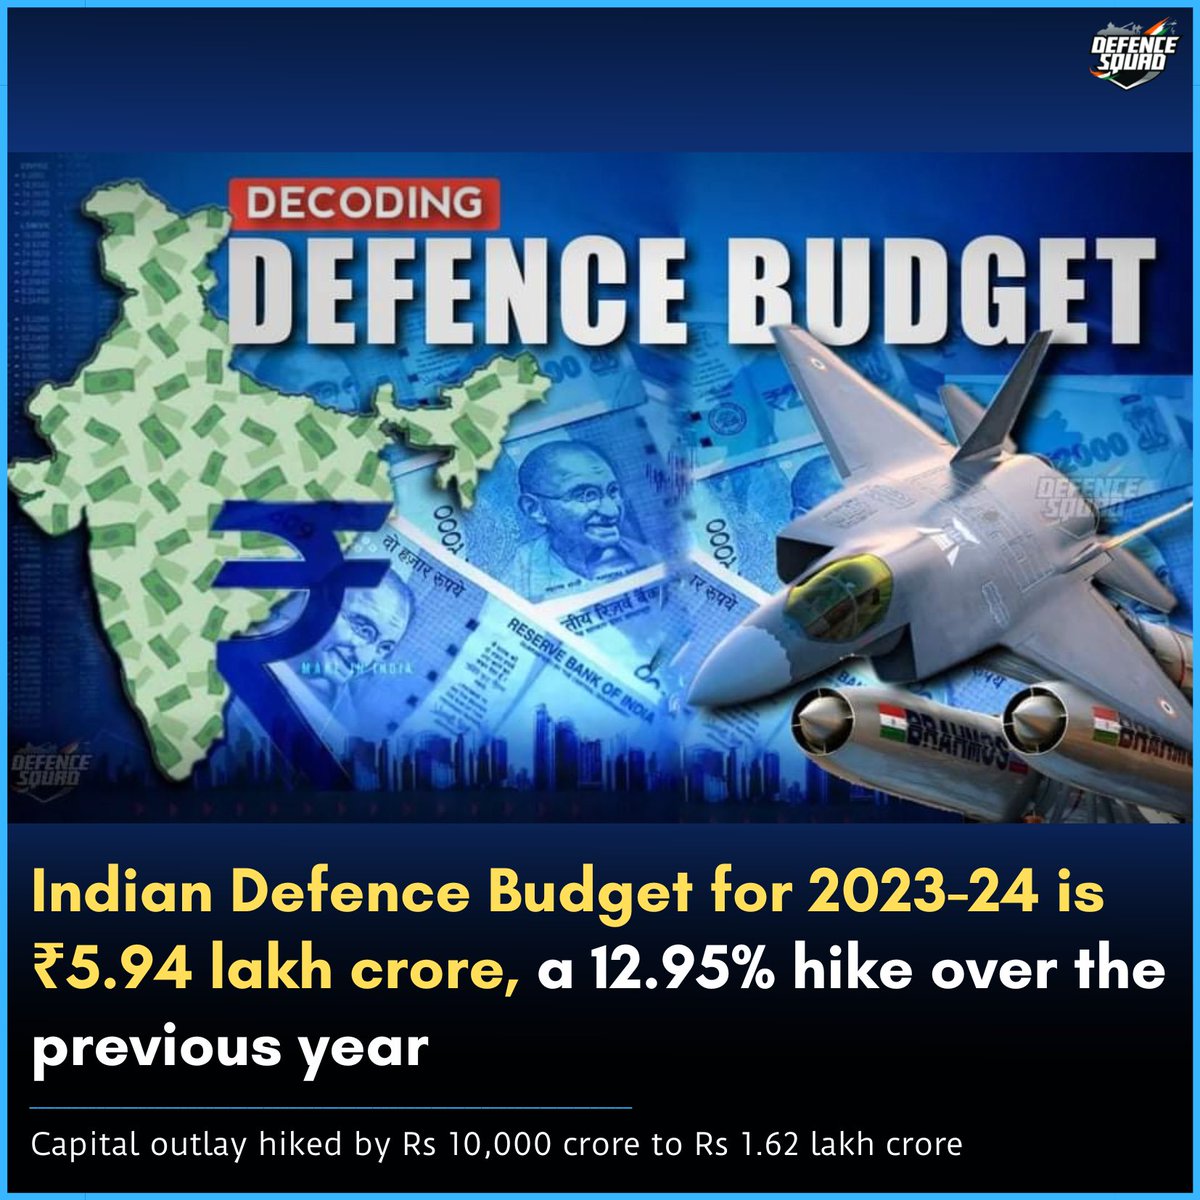 Indian Defence Budget for 2023-24 is ₹5.93 lakh crore, a 12.95% hike over the previous year.

Capital outlay hiked by Rs 10,000 crore to₹1.62 lakh crore. #UnionBudget2023 #DefenceBudget